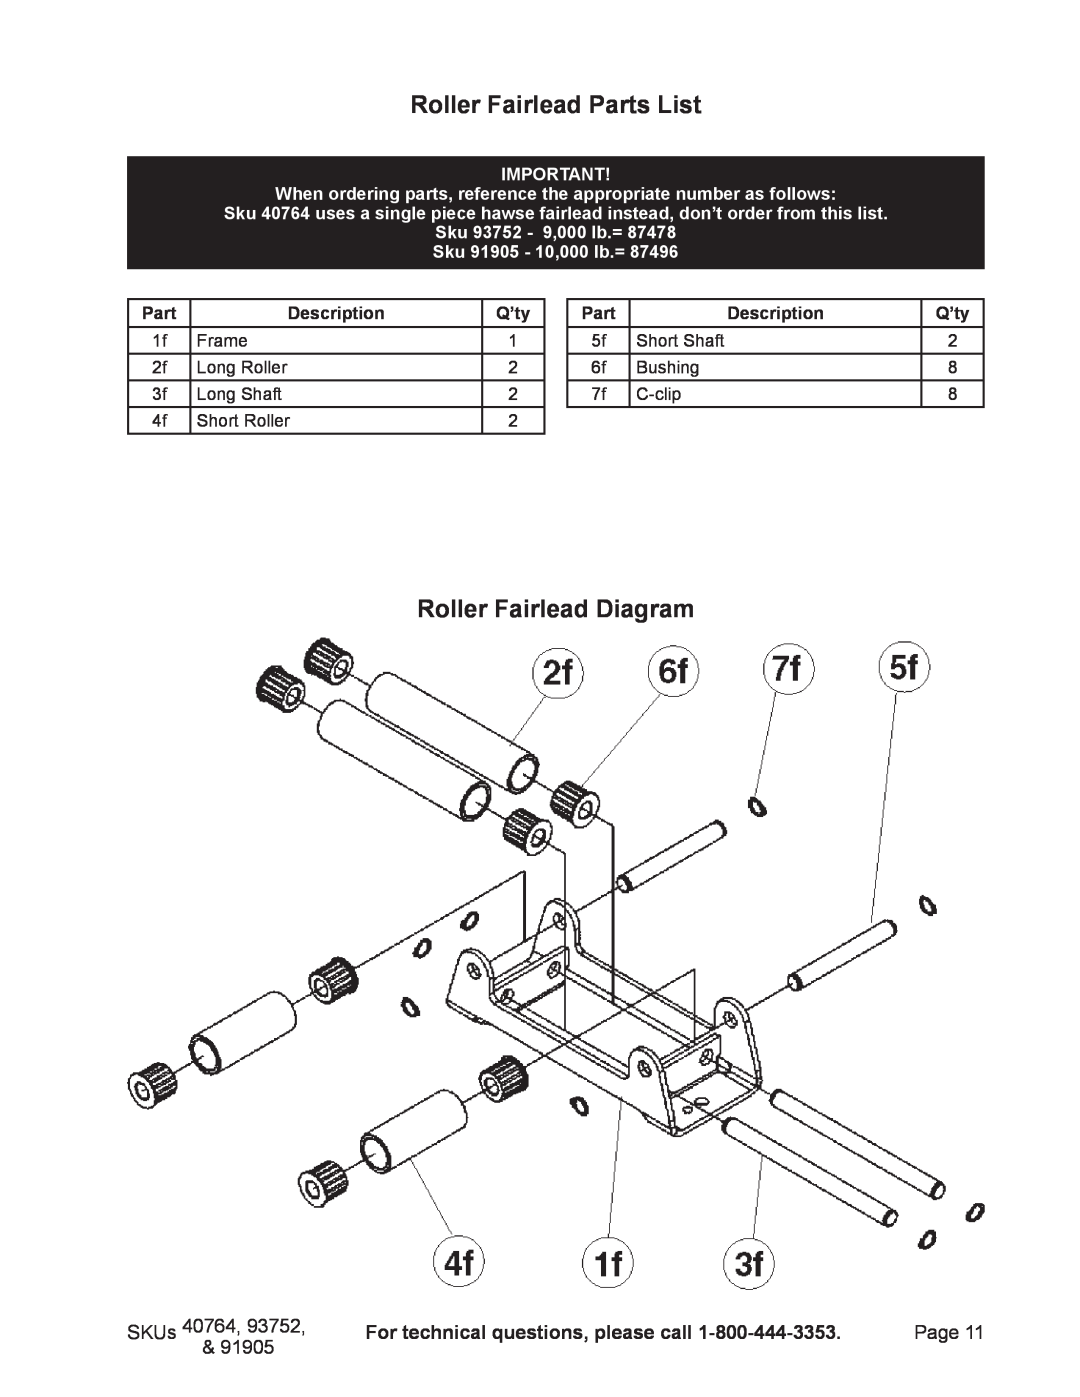 Chicago Electric 91905 Roller Fairlead Parts List, Roller Fairlead Diagram, SKUs, For technical questions, please call 